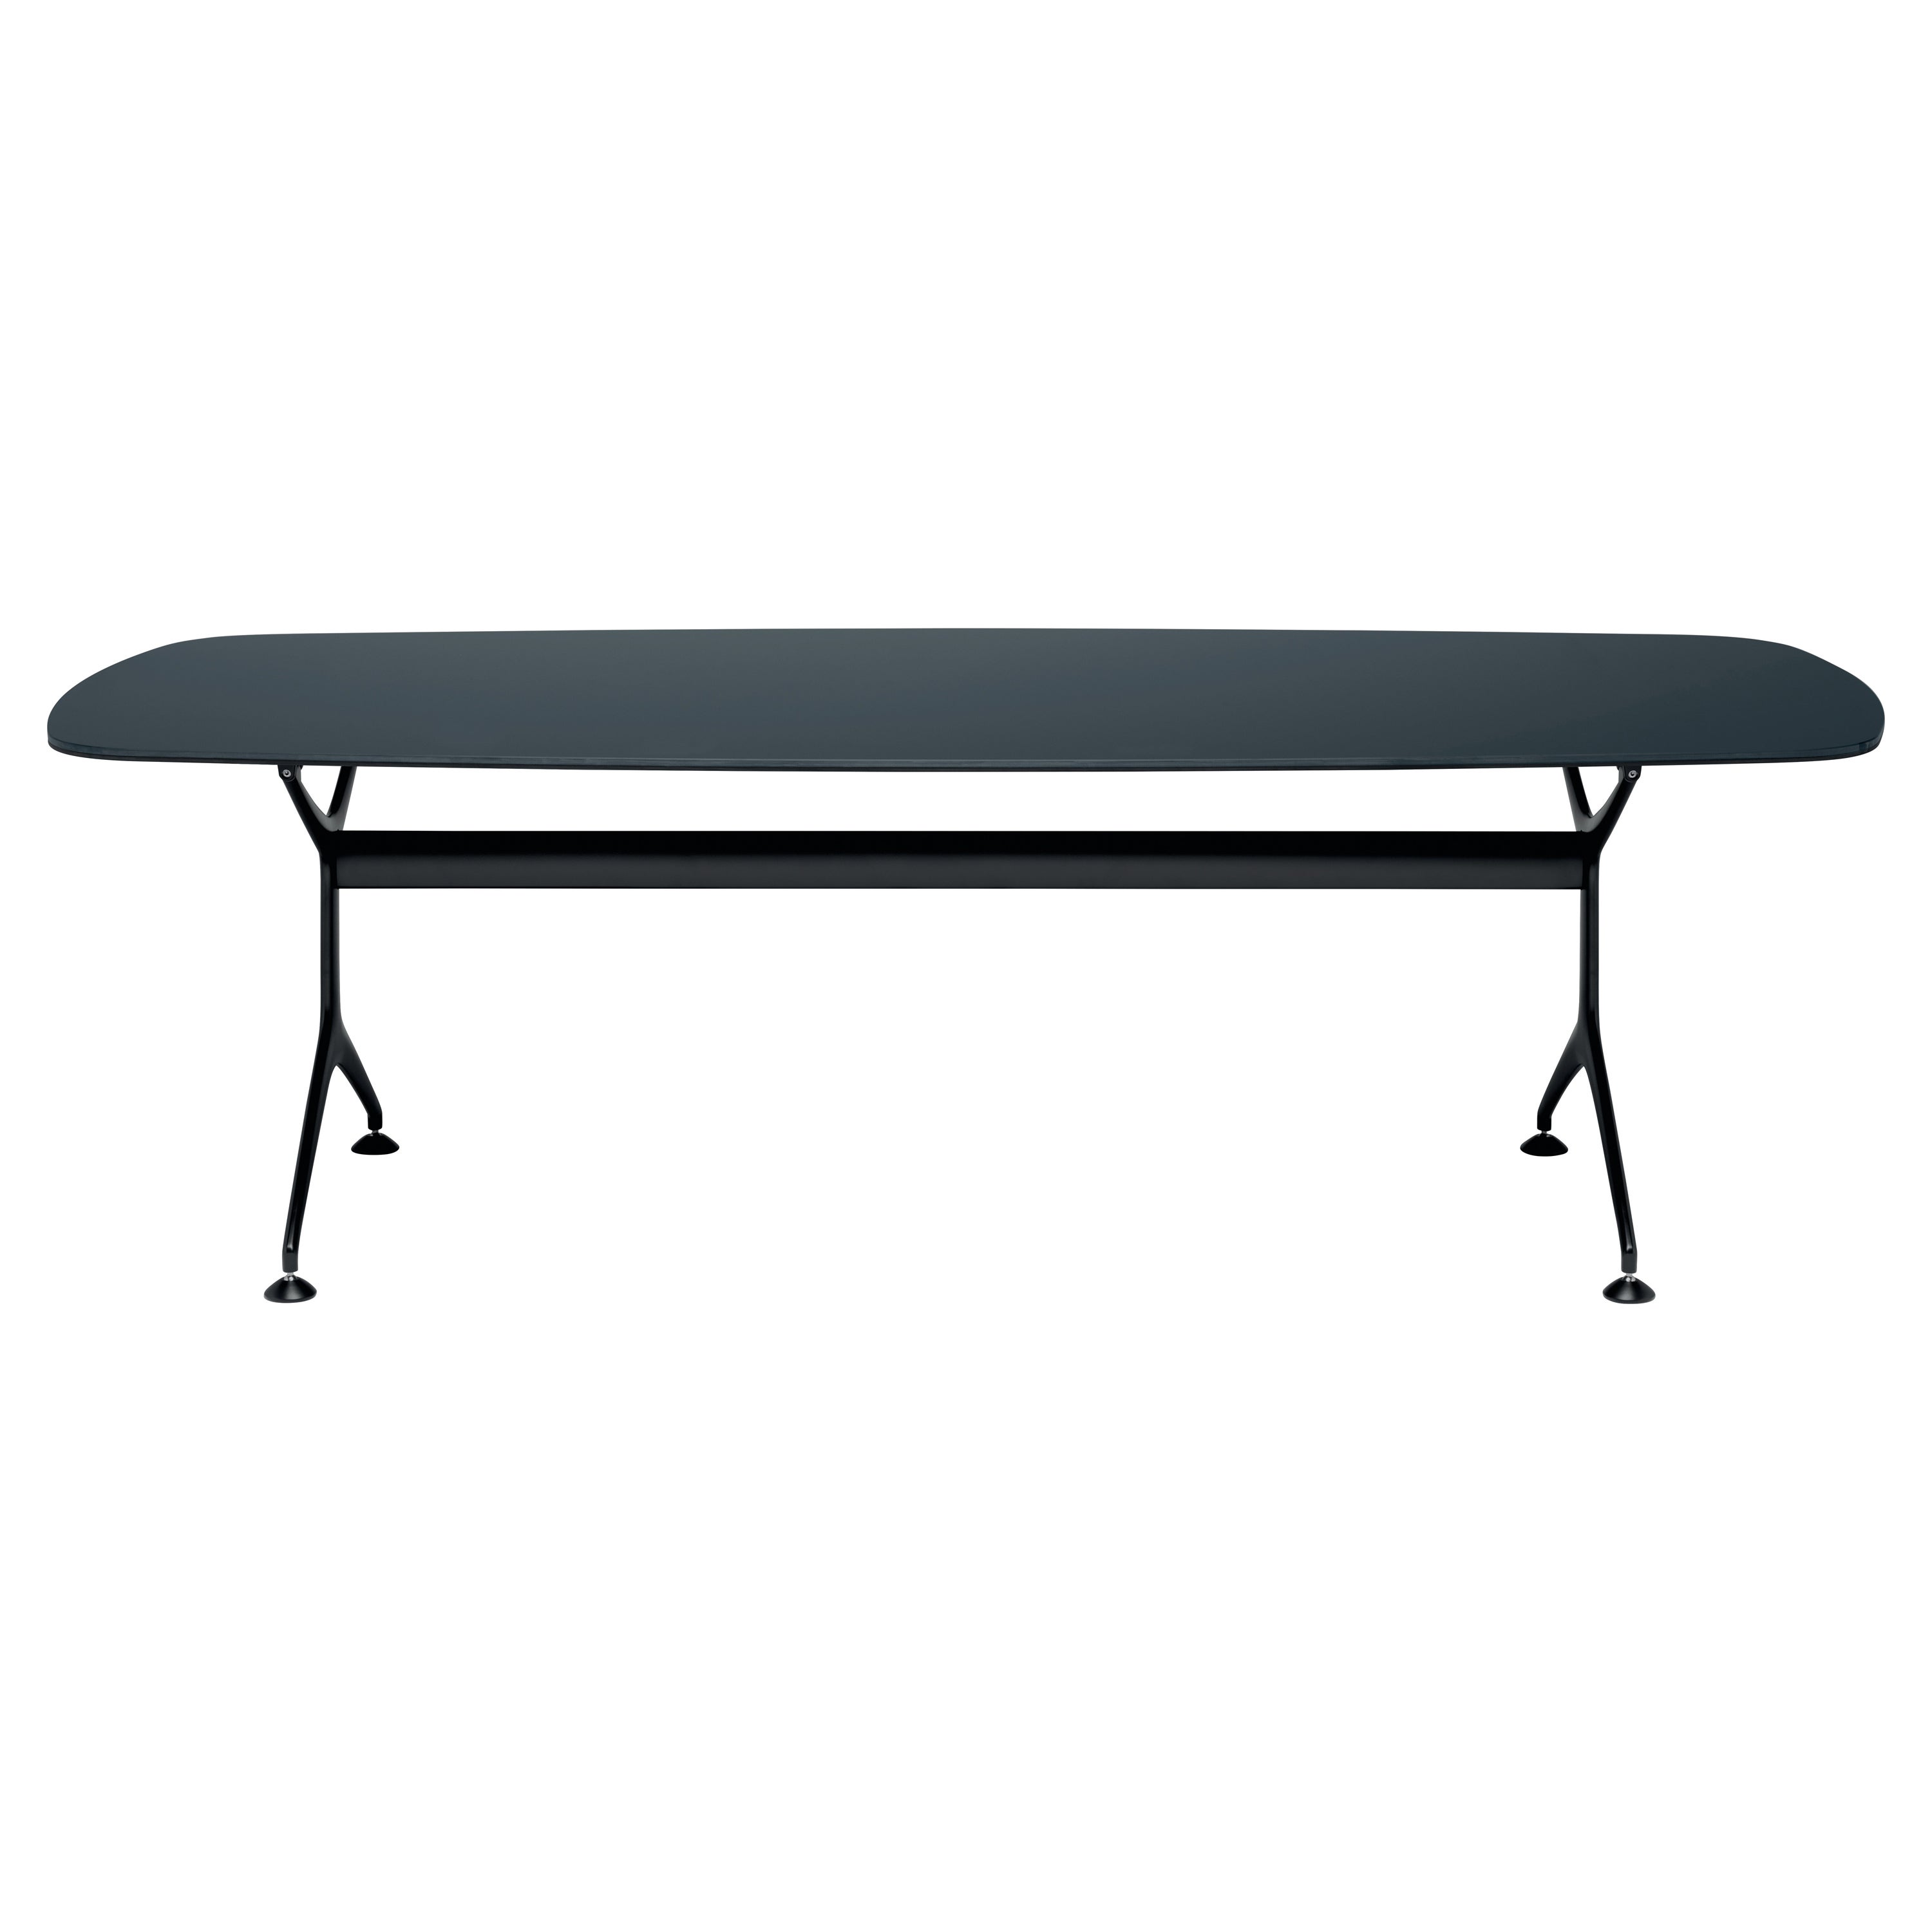 Alias Frametable 190 in Black Glass Top with Smooth Lacquered Aluminium Frame For Sale